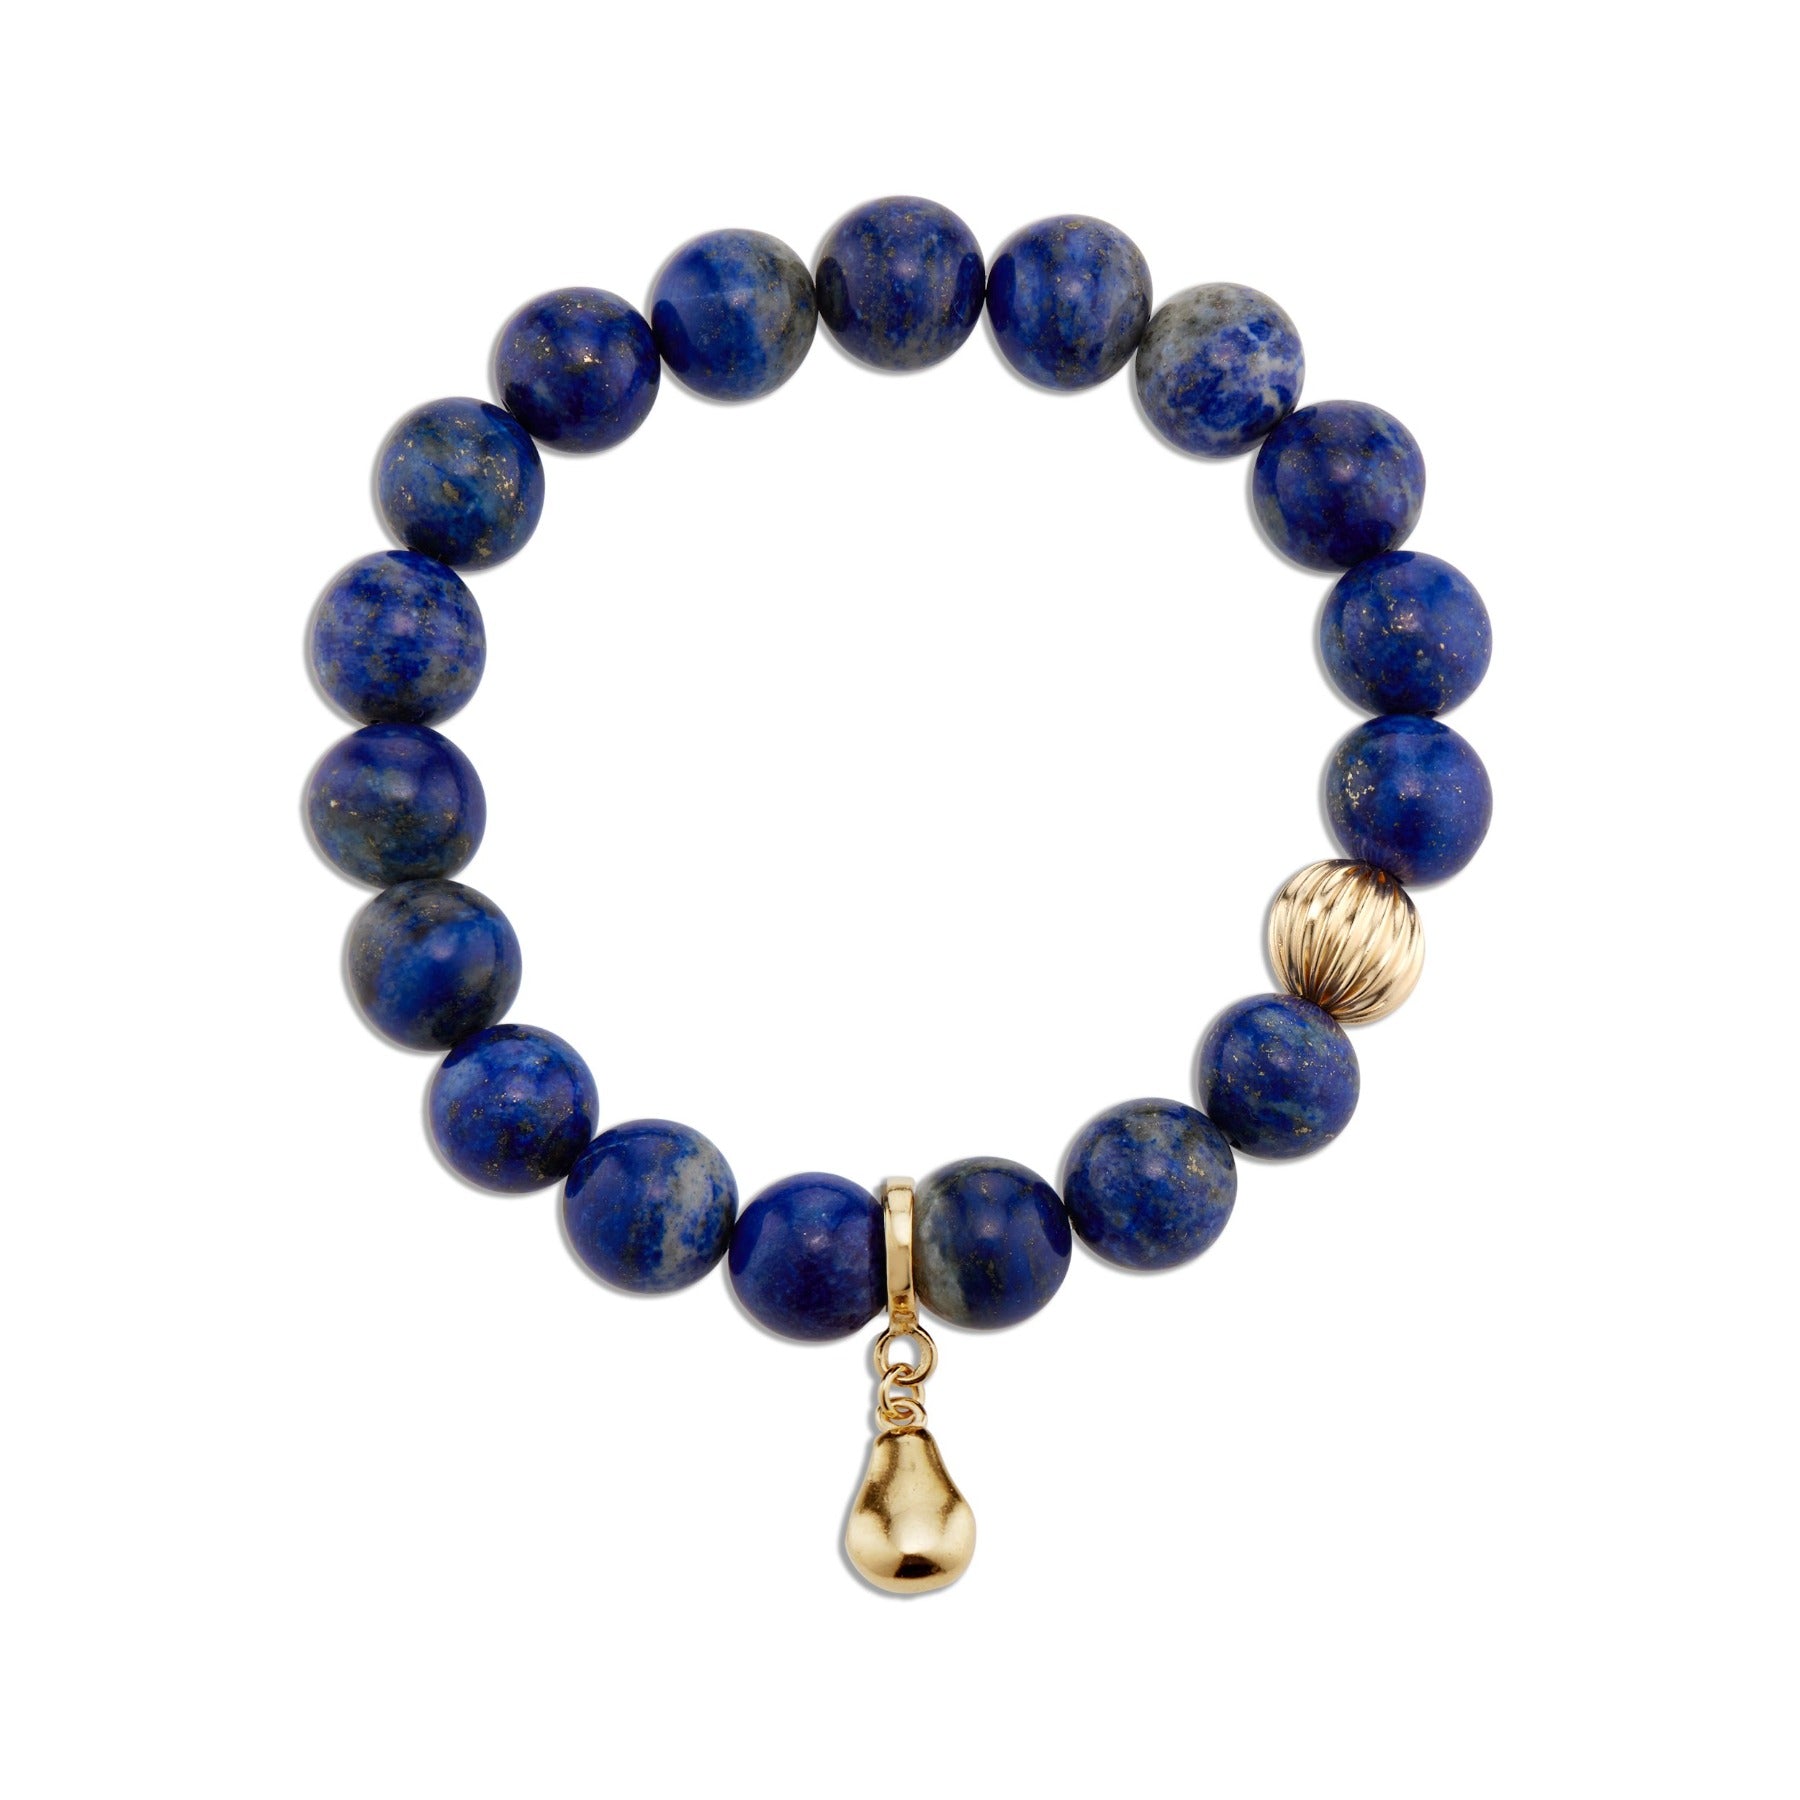 Blue lapis crystal smooth gemstone elastic bracelet with 14k gold corrugated bead and pear charm.